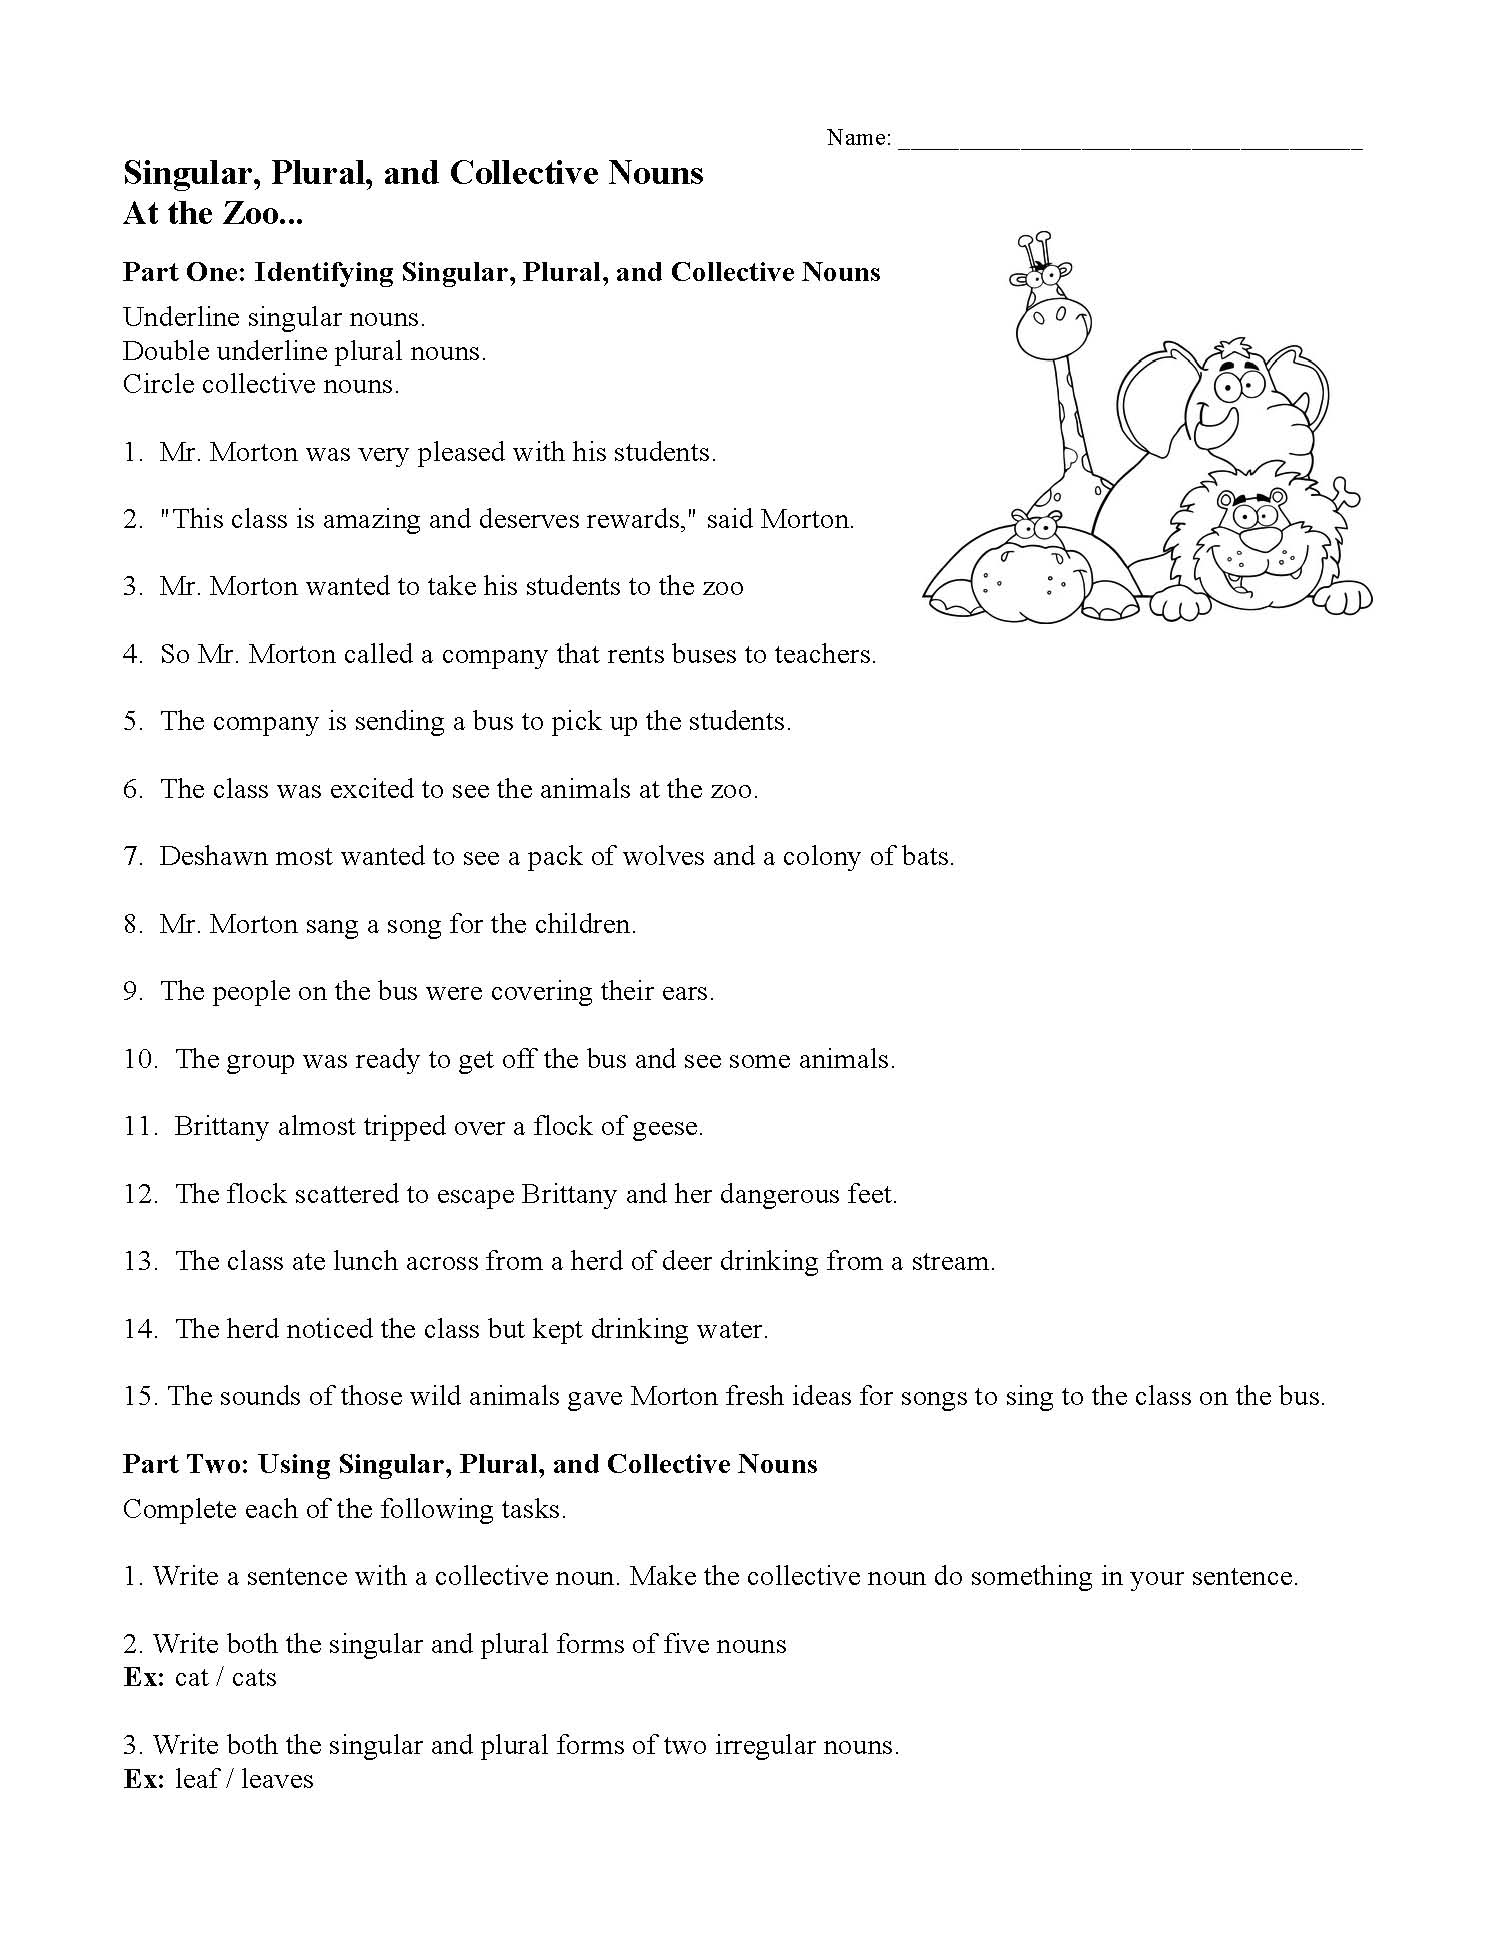 singular-plural-and-collective-nouns-worksheet-preview